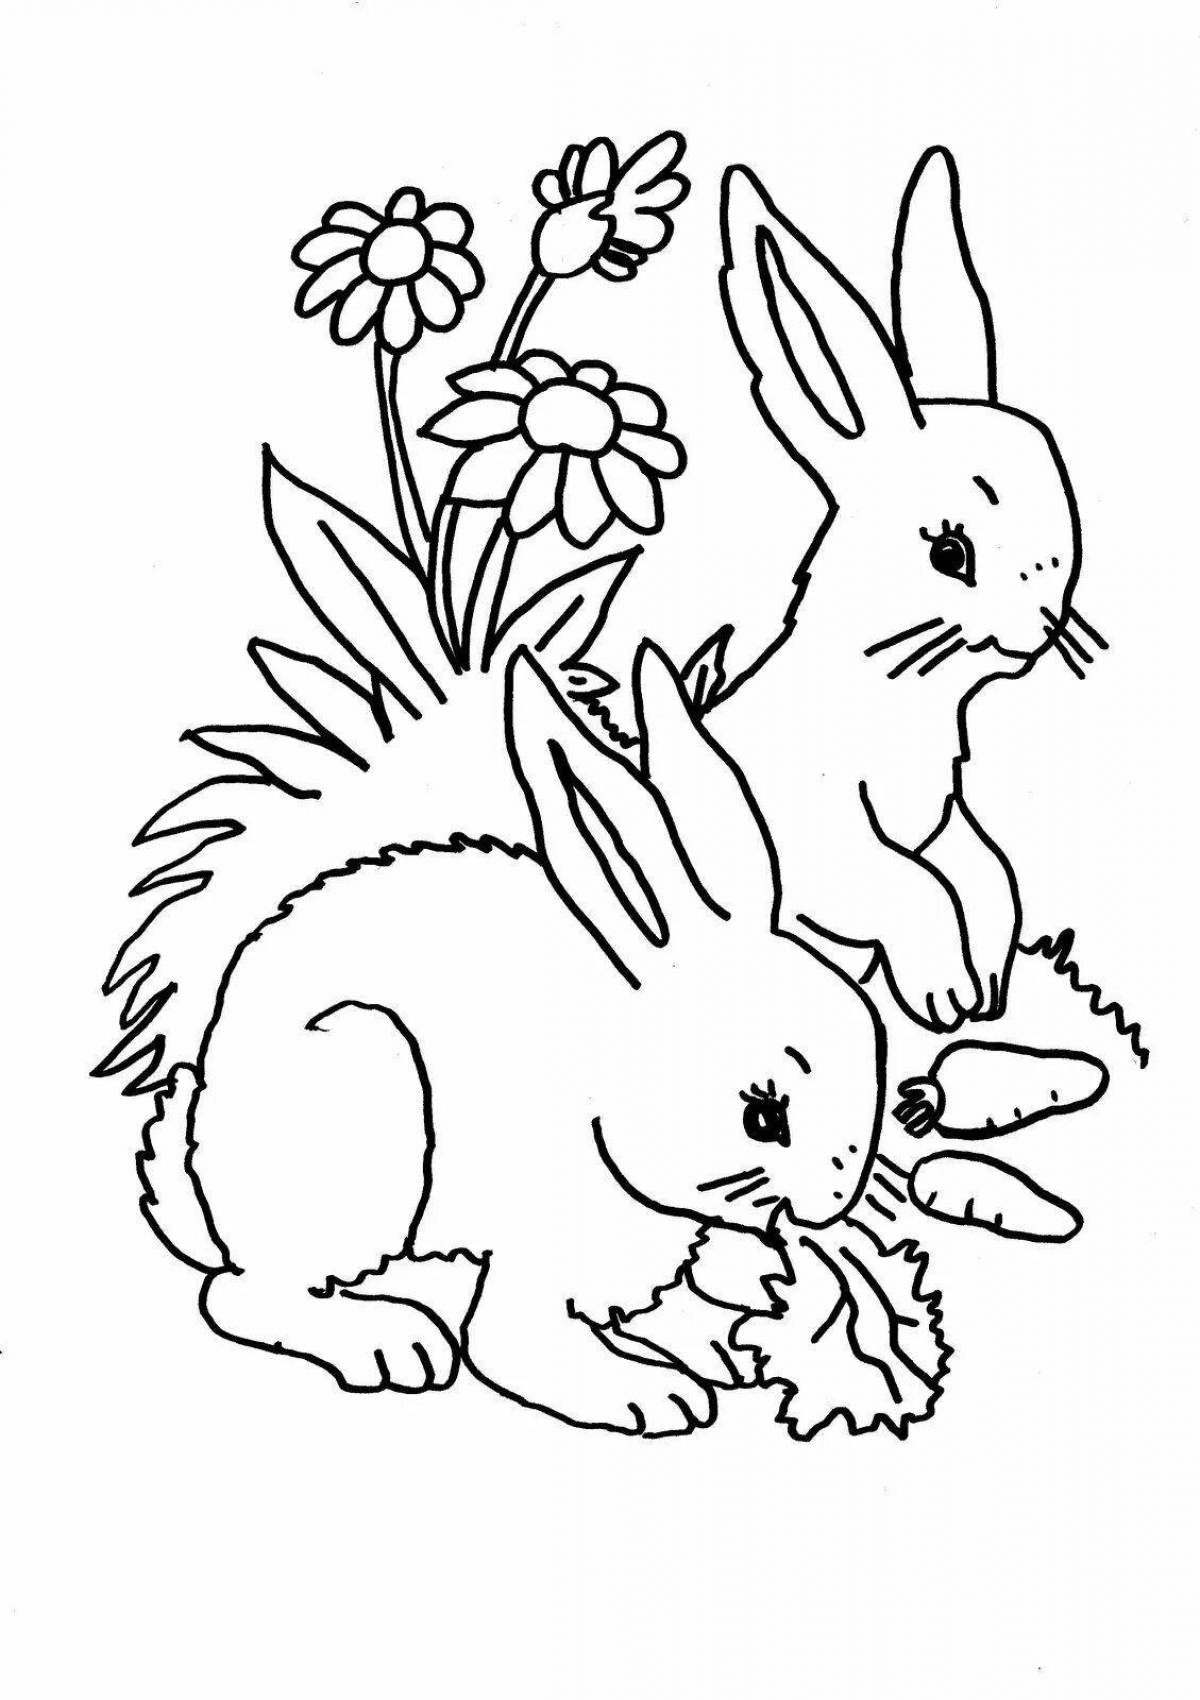 Coloring page happy rabbit for girls